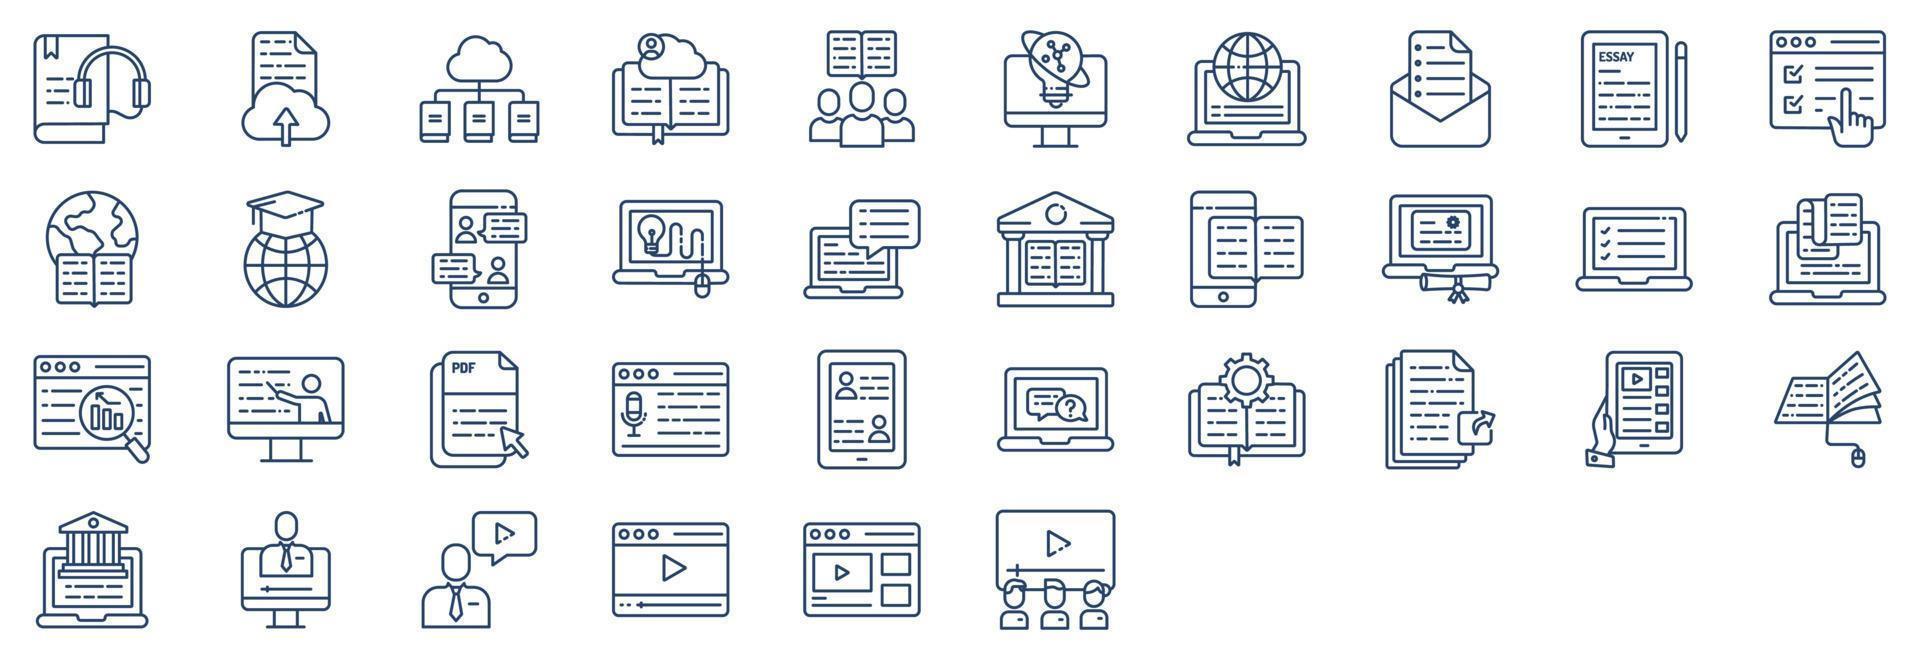 Collection of icons related to Online Education, including icons like Audio Book, Cloud Library, Examination, Graduation and more. vector illustrations, Pixel Perfect set